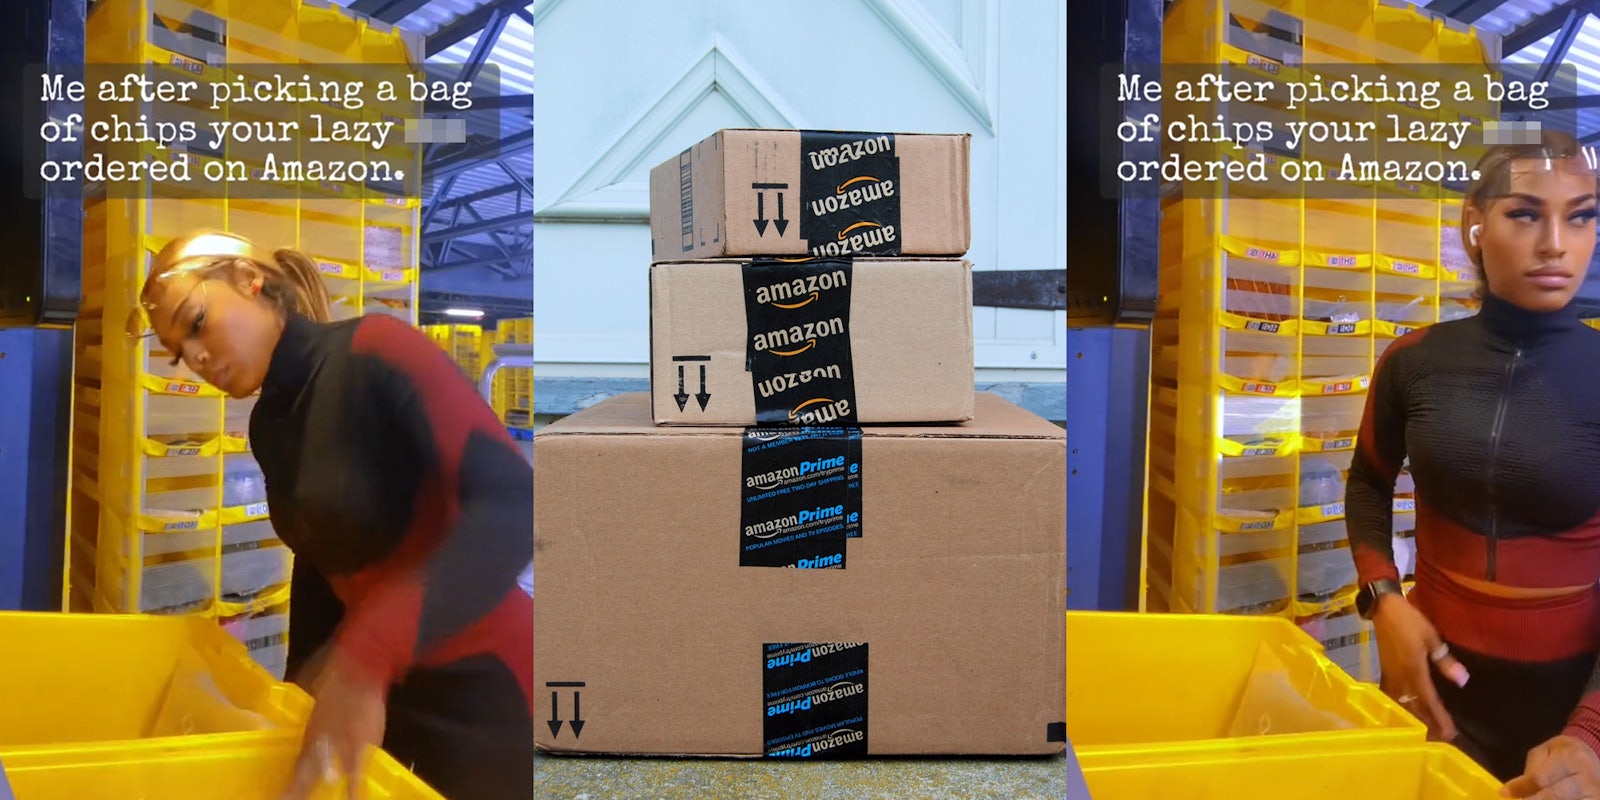 Amazon worker with caption 'Me after picking a bag of chips your lazy blank ordered on Amazon' (l) Amazon packages delivered at doorstep (c) Amazon worker with caption 'Me after picking a bag of chips your lazy blank ordered on Amazon'